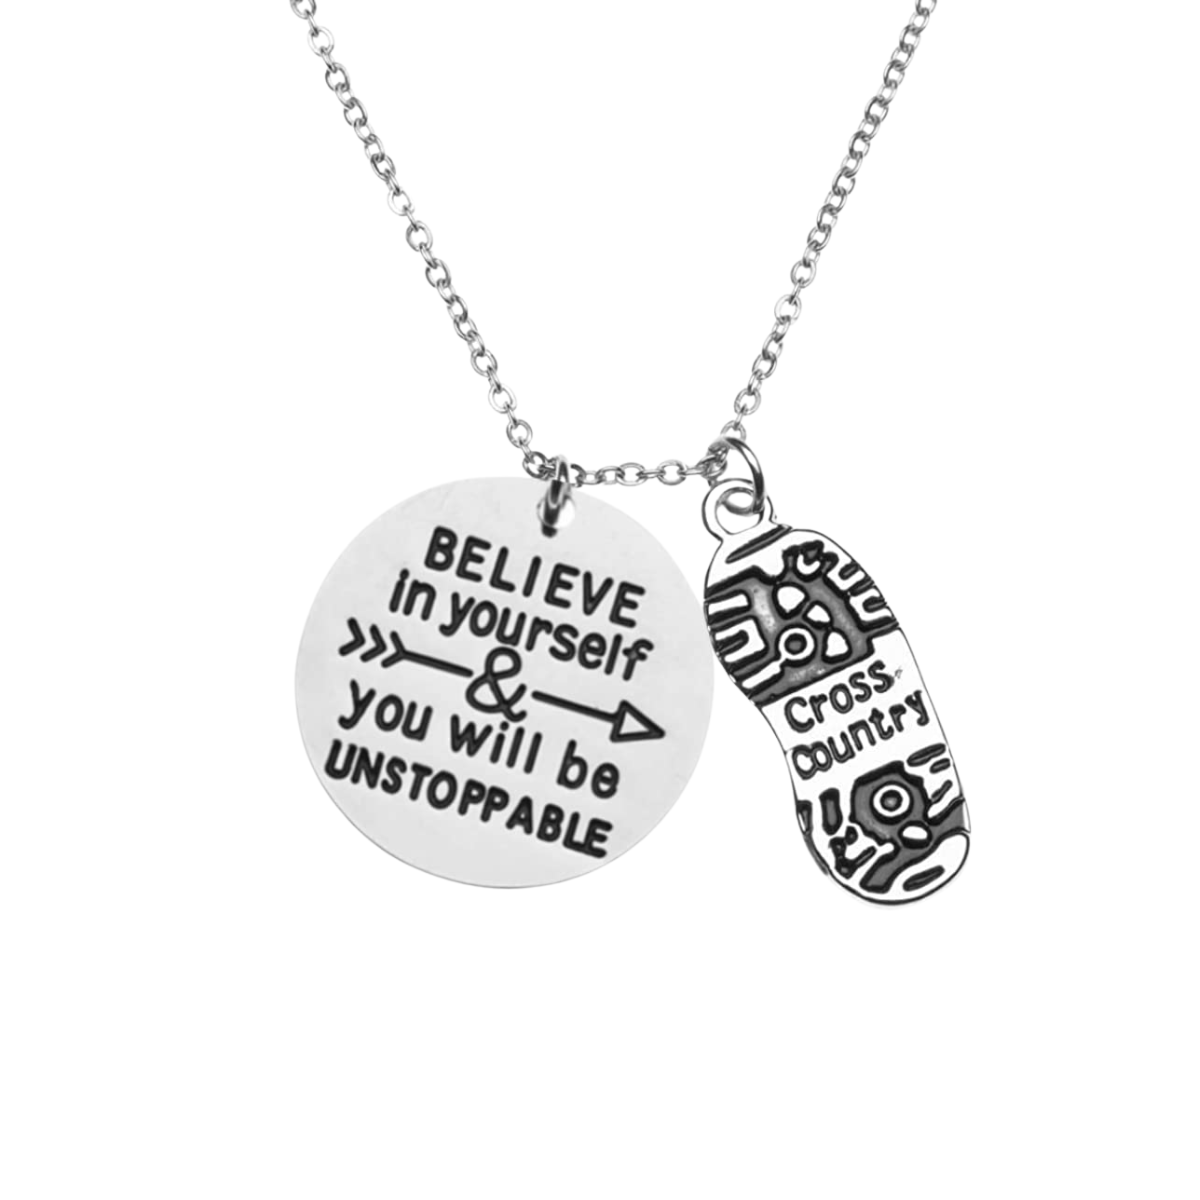 cross country necklace Believe in Yourself and You Will Be Unstoppable